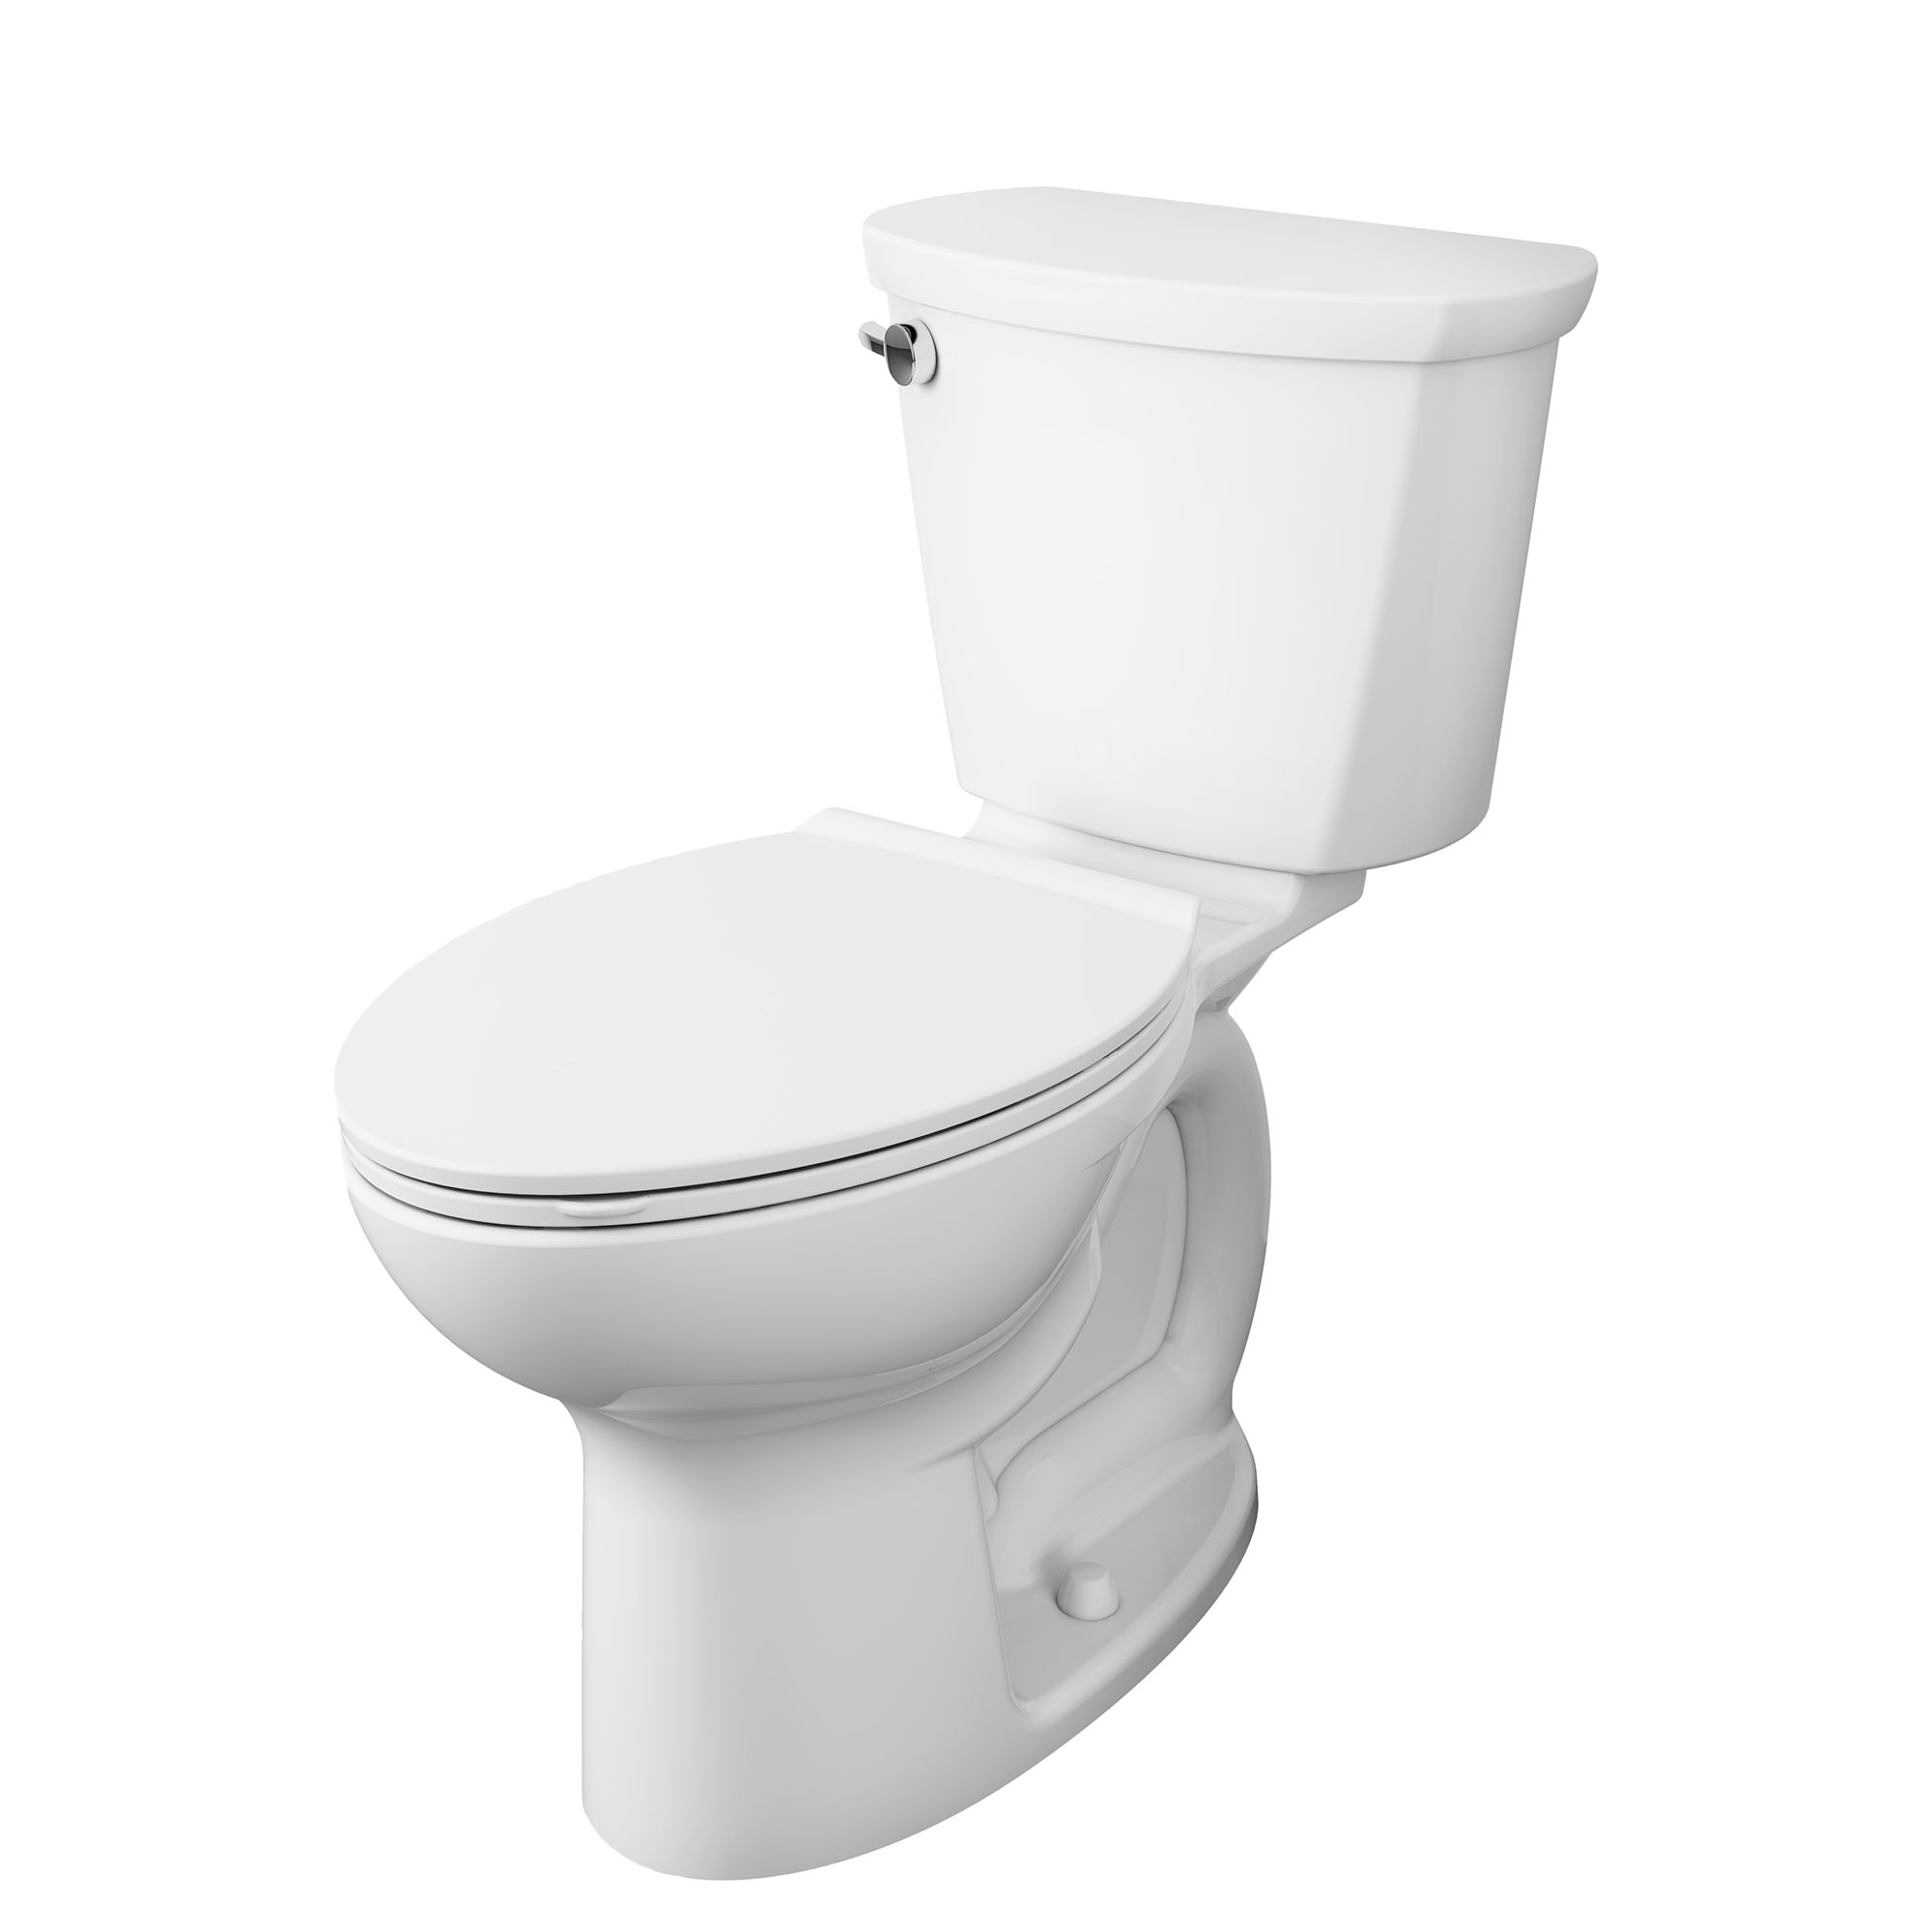 Cadet® PRO Two-Piece 1.6 gpf/6.0 Lpf Compact Chair Height Elongated 14-Inch Rough Toilet Less Seat